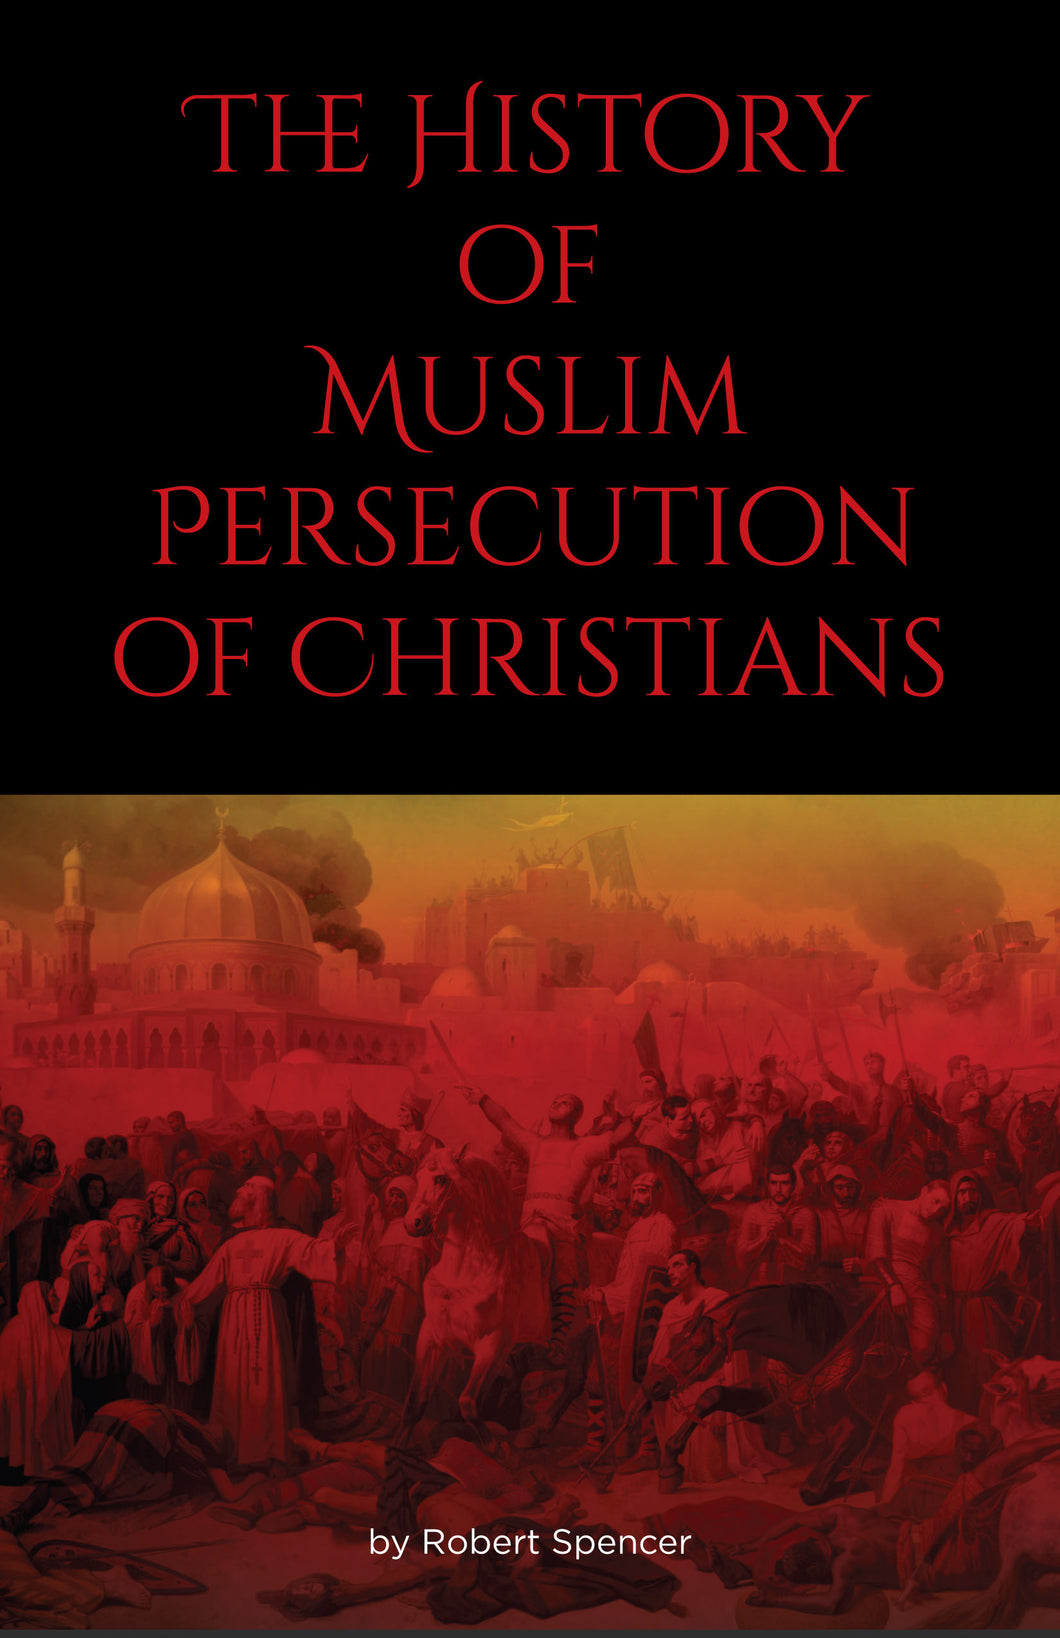 The History of Muslim Persecution of Christians